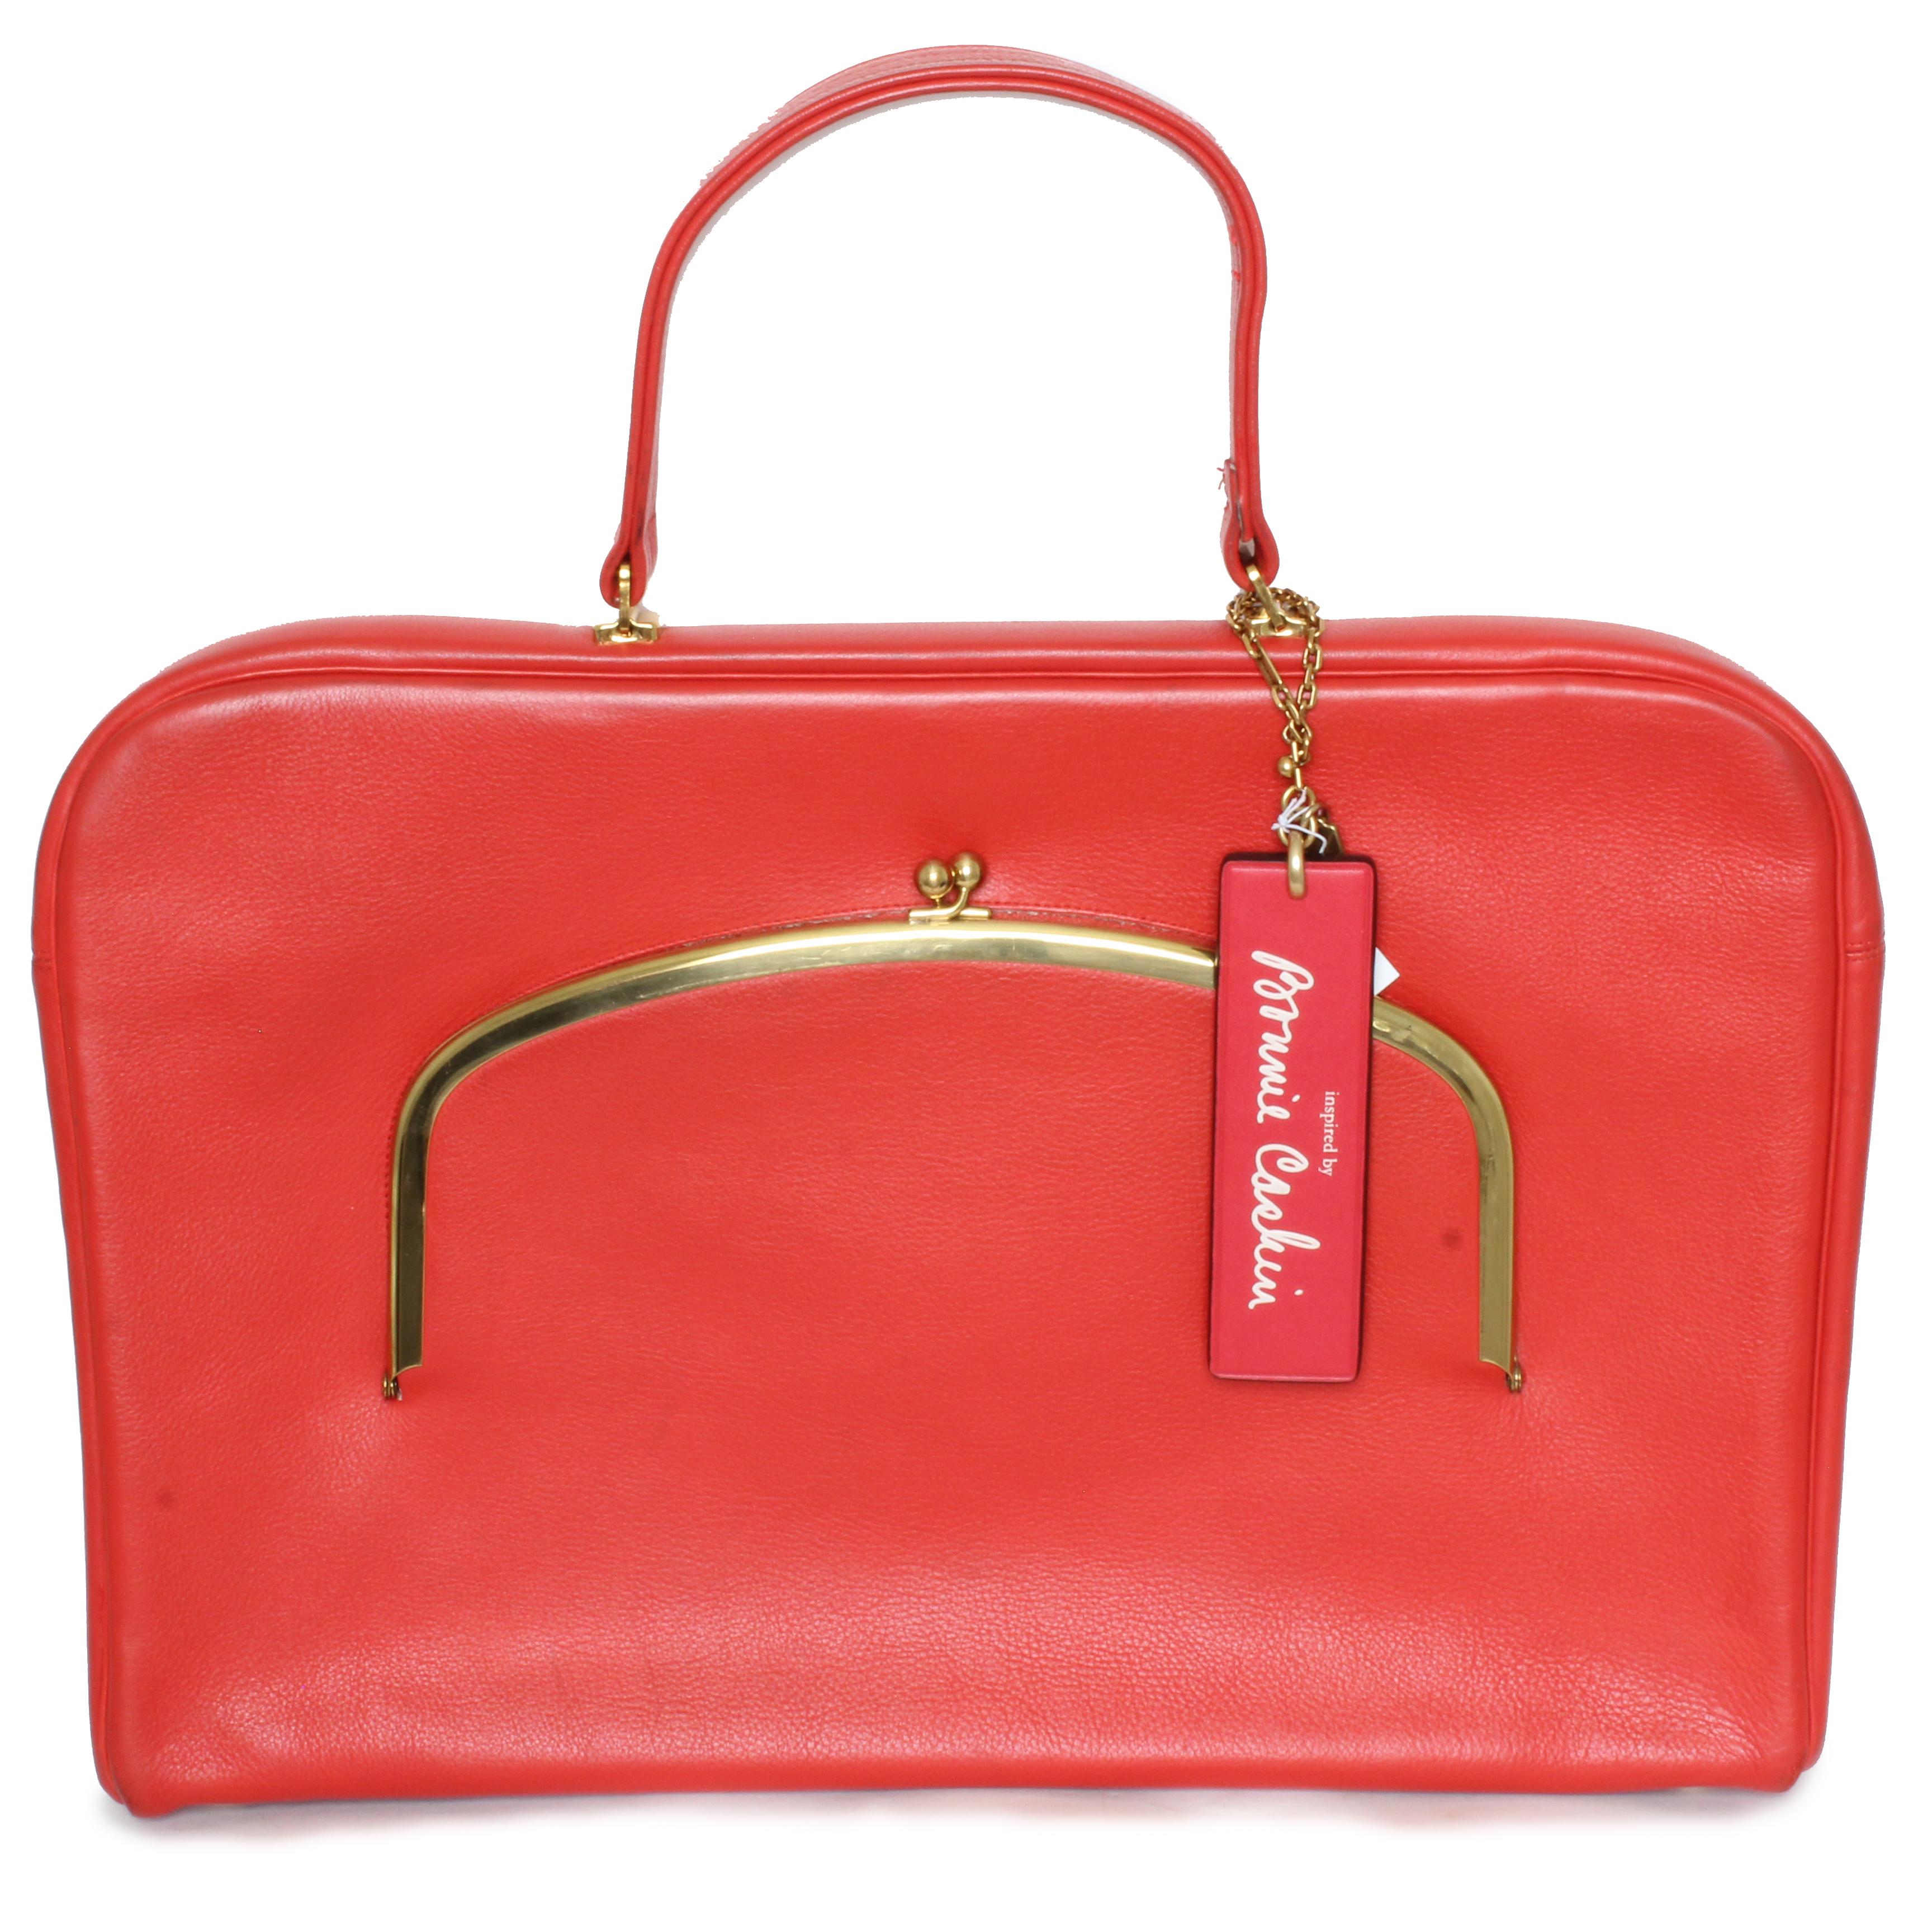 Vintage Bonnie Cashin for Coach 'Cashin Carry' leather attache or briefcase bag, likely made in the 60s.  Fabulous and rare - this is a classic style with an incredibly vibrant color (as you would expect from Bonnie Cashin).  Made from a red leather